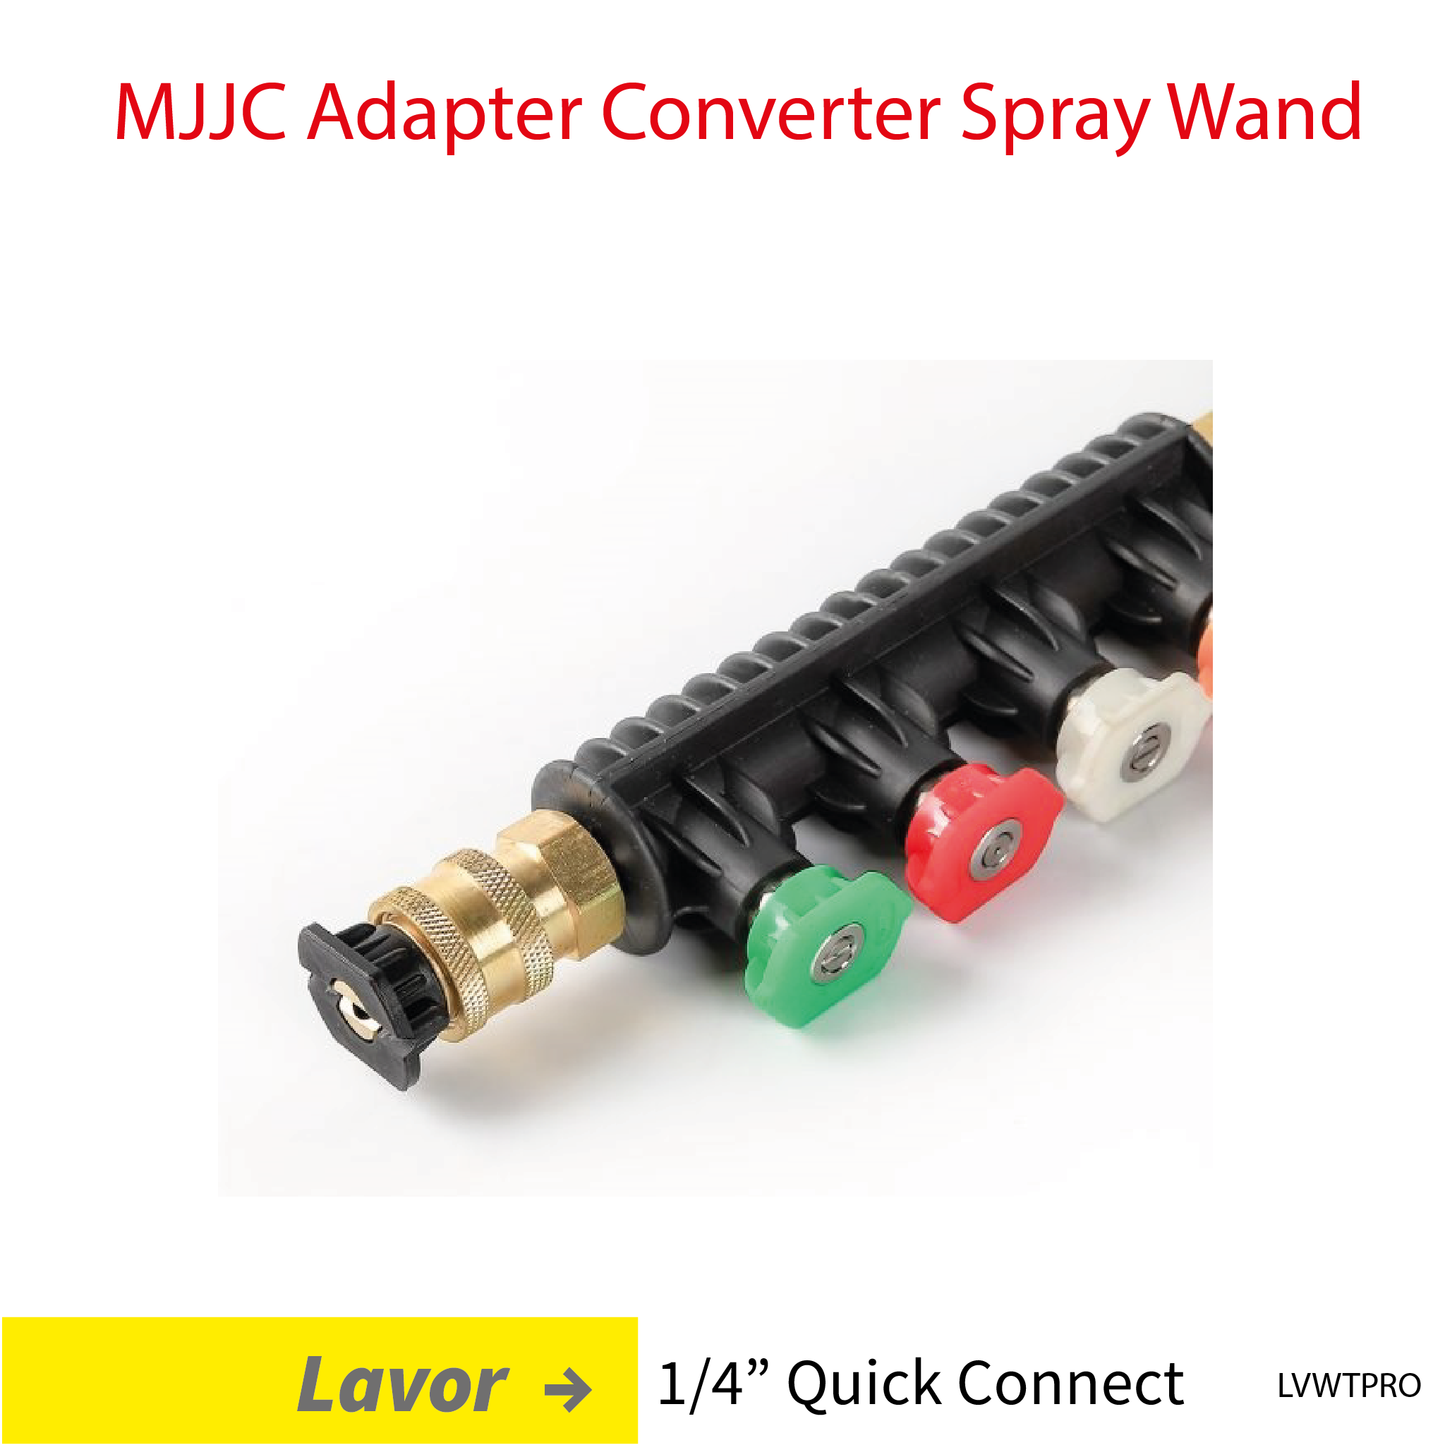 Lavor MJJC Adapter Conversion Converter pressure washer Spray Wand with 5 spray tips